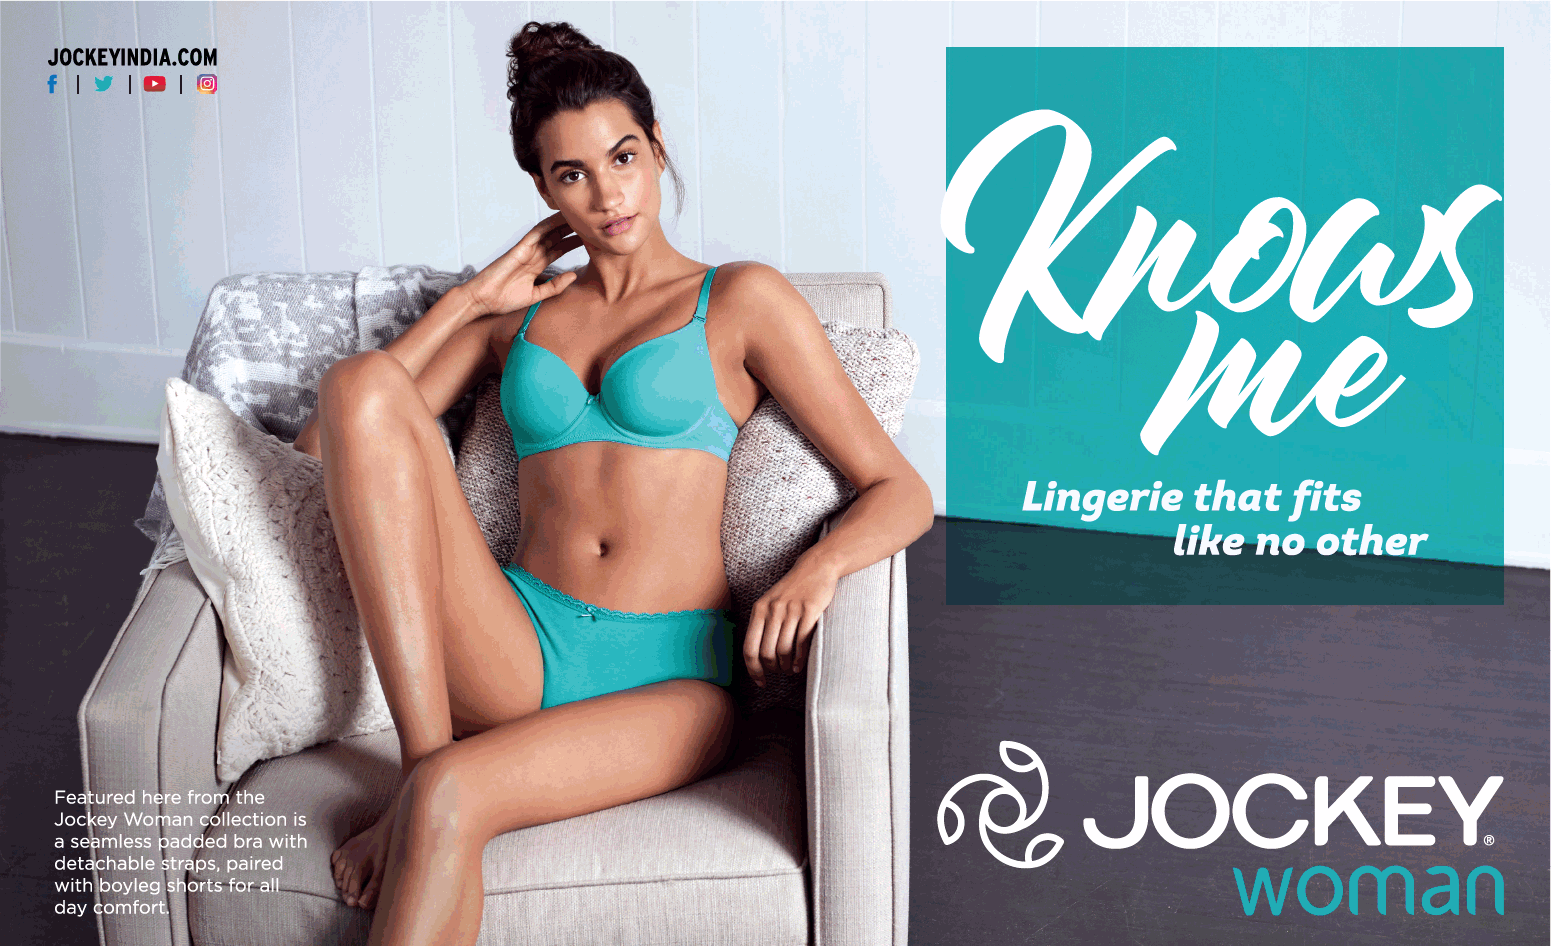 jockey-woman-lingerie-that-fits-like-no-other-ad-times-of-india-delhi-29-11-2018.png